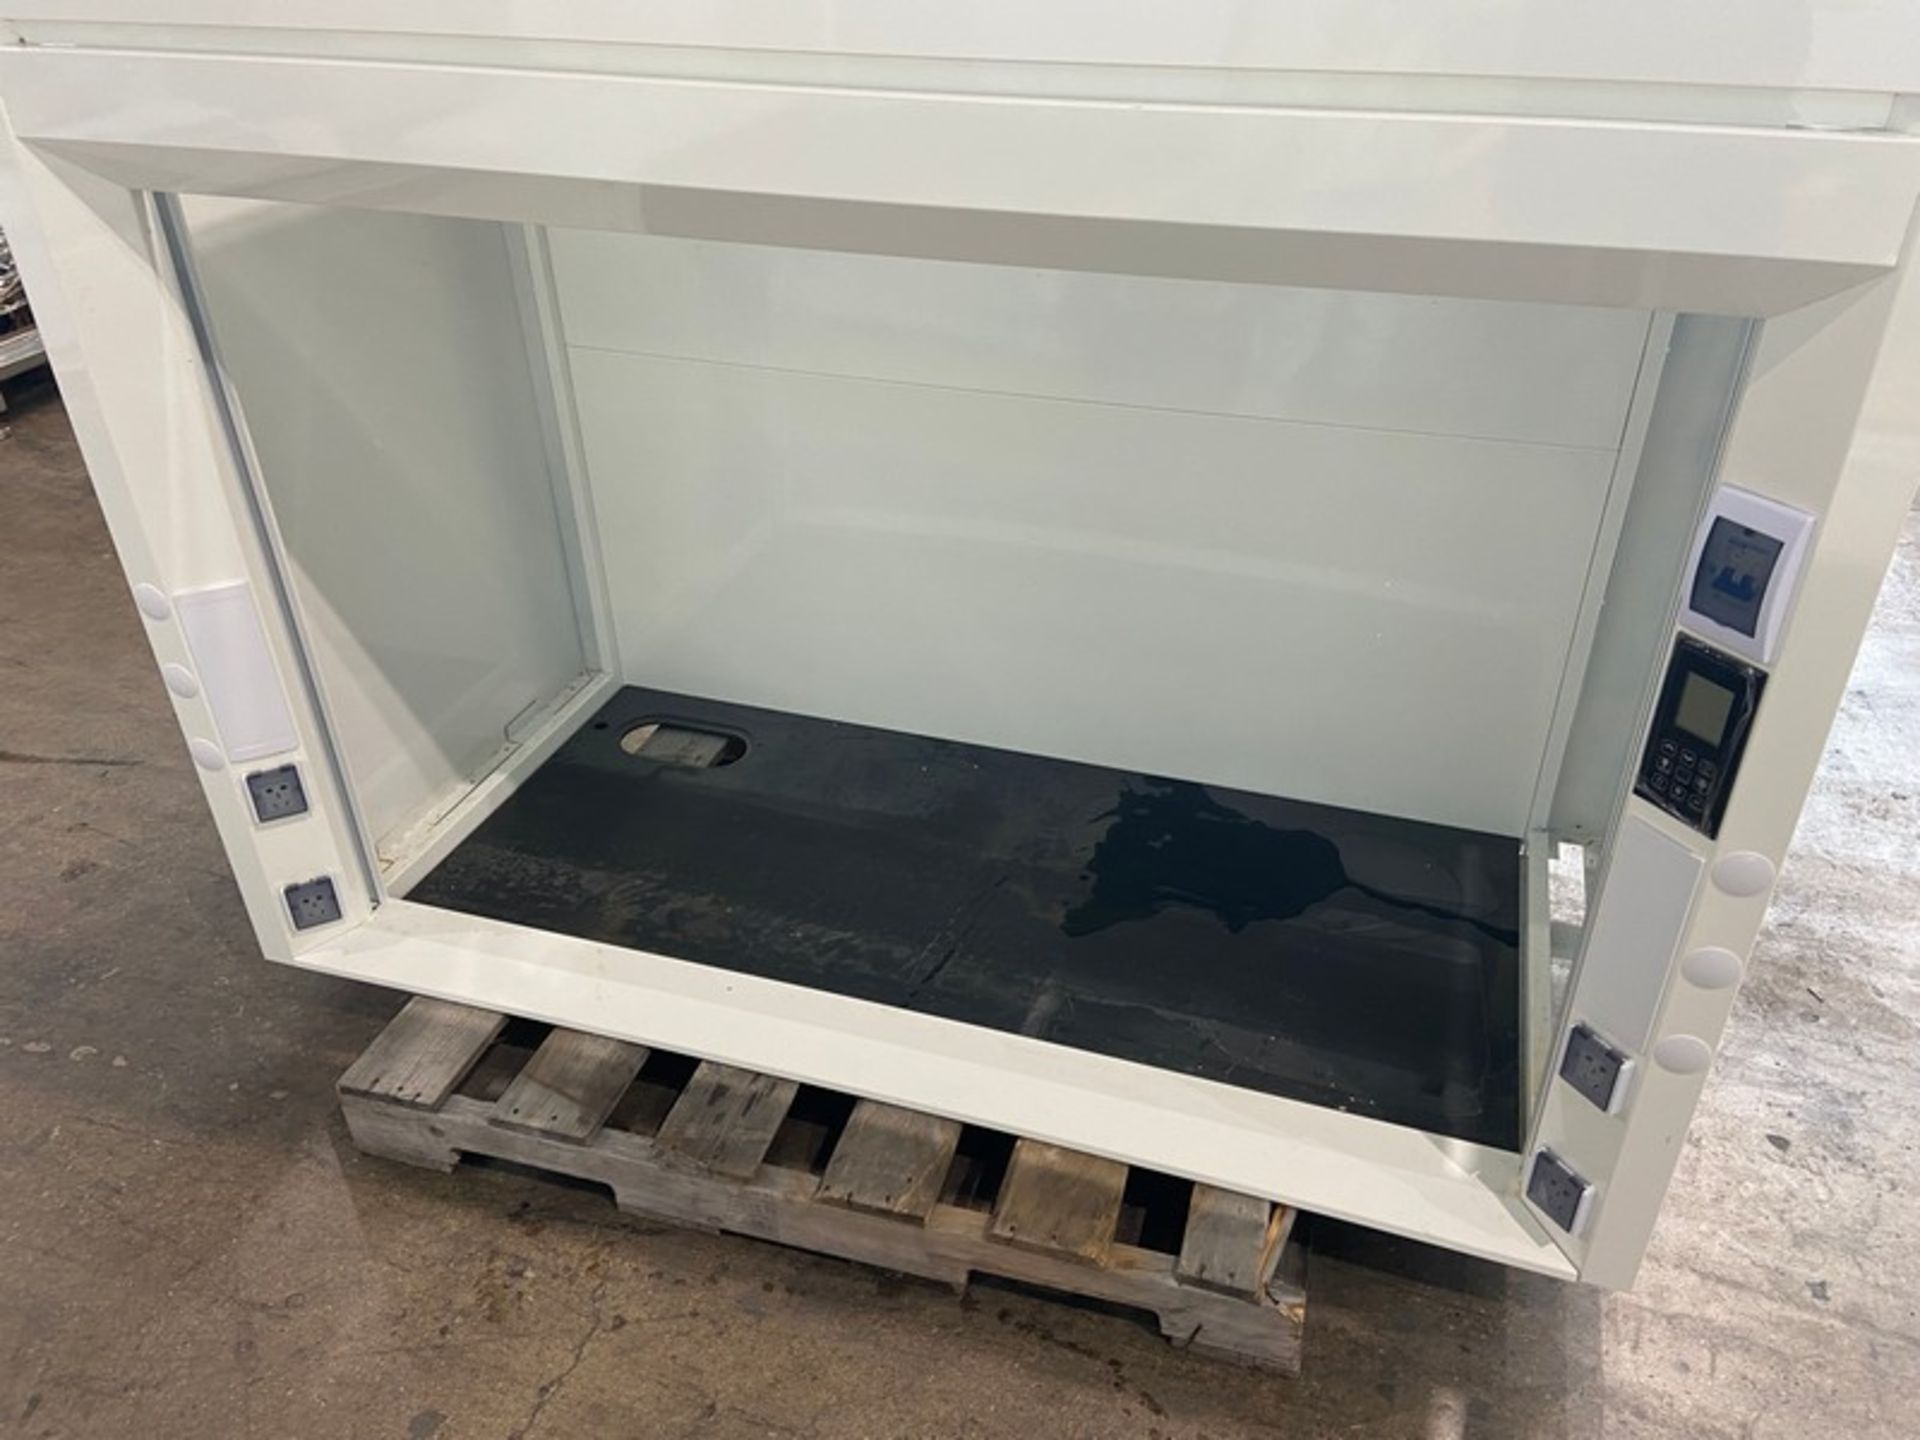 Fume Hood, Overall Dims.: Aprox. 71" L x 33-1/2" W x 59" H (INV#97141) (Located @ the MDG Auction - Image 3 of 5